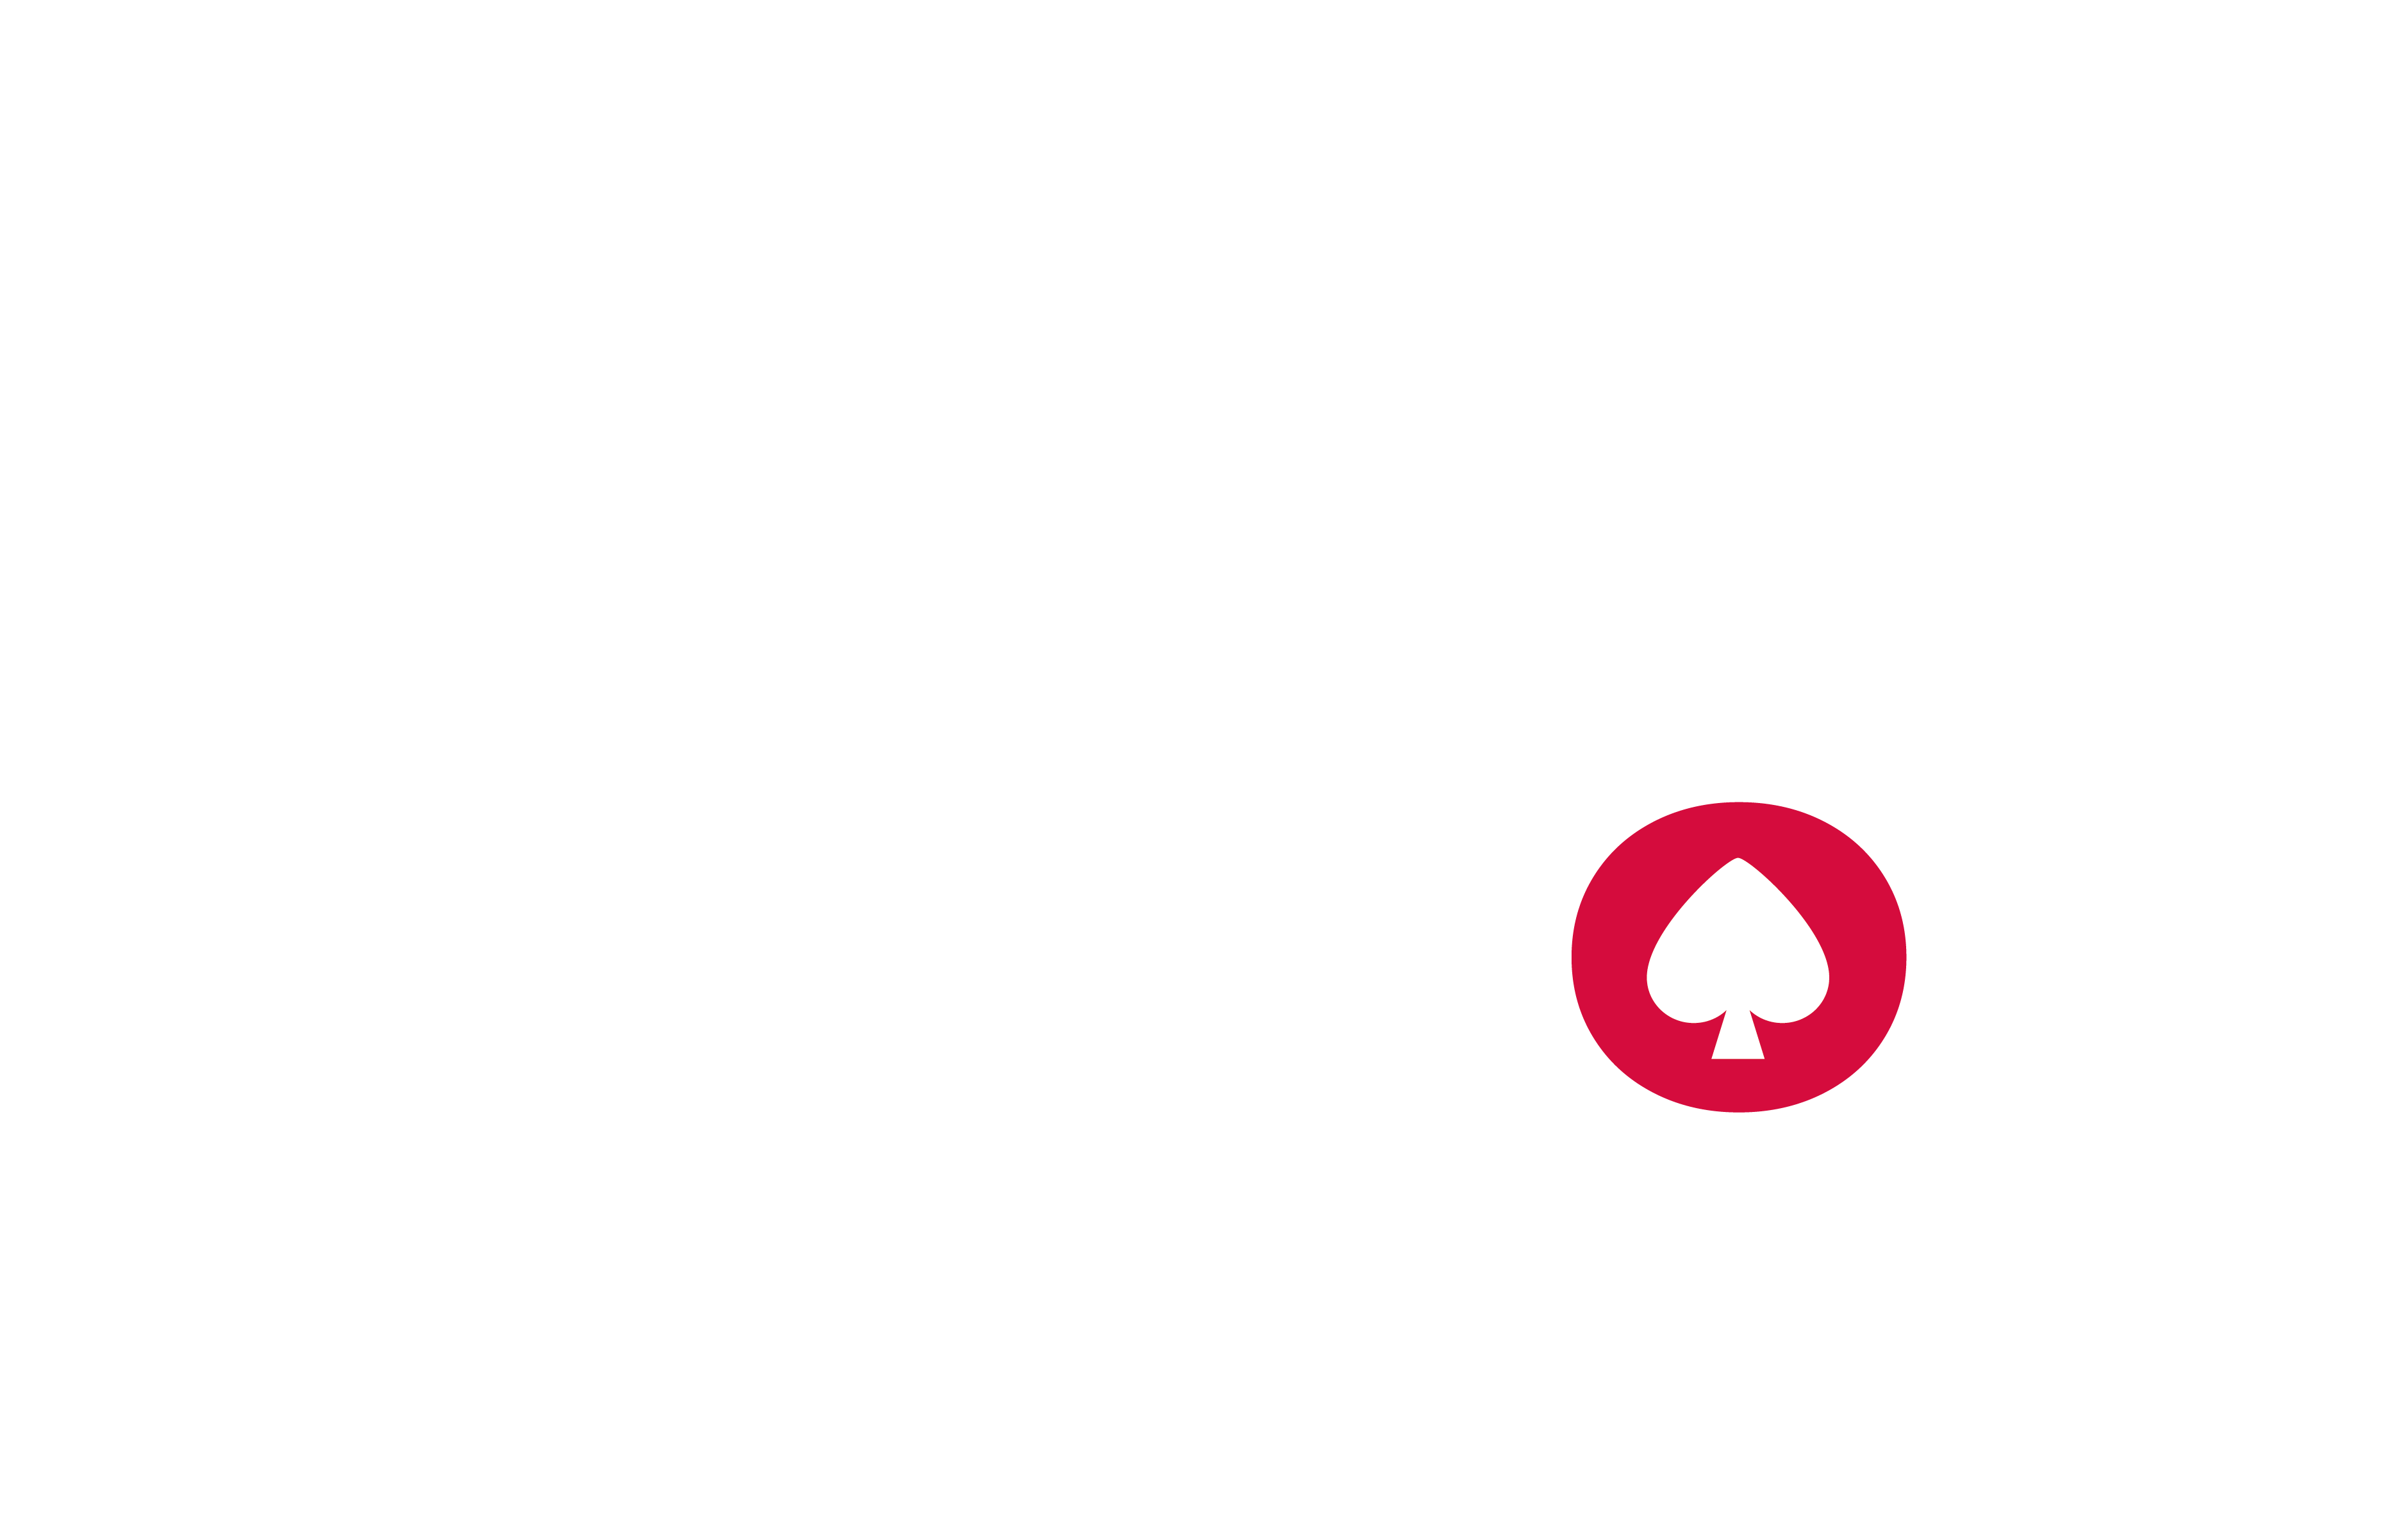 Now You Can Have The legit bitcoin casino Of Your Dreams – Cheaper/Faster Than You Ever Imagined